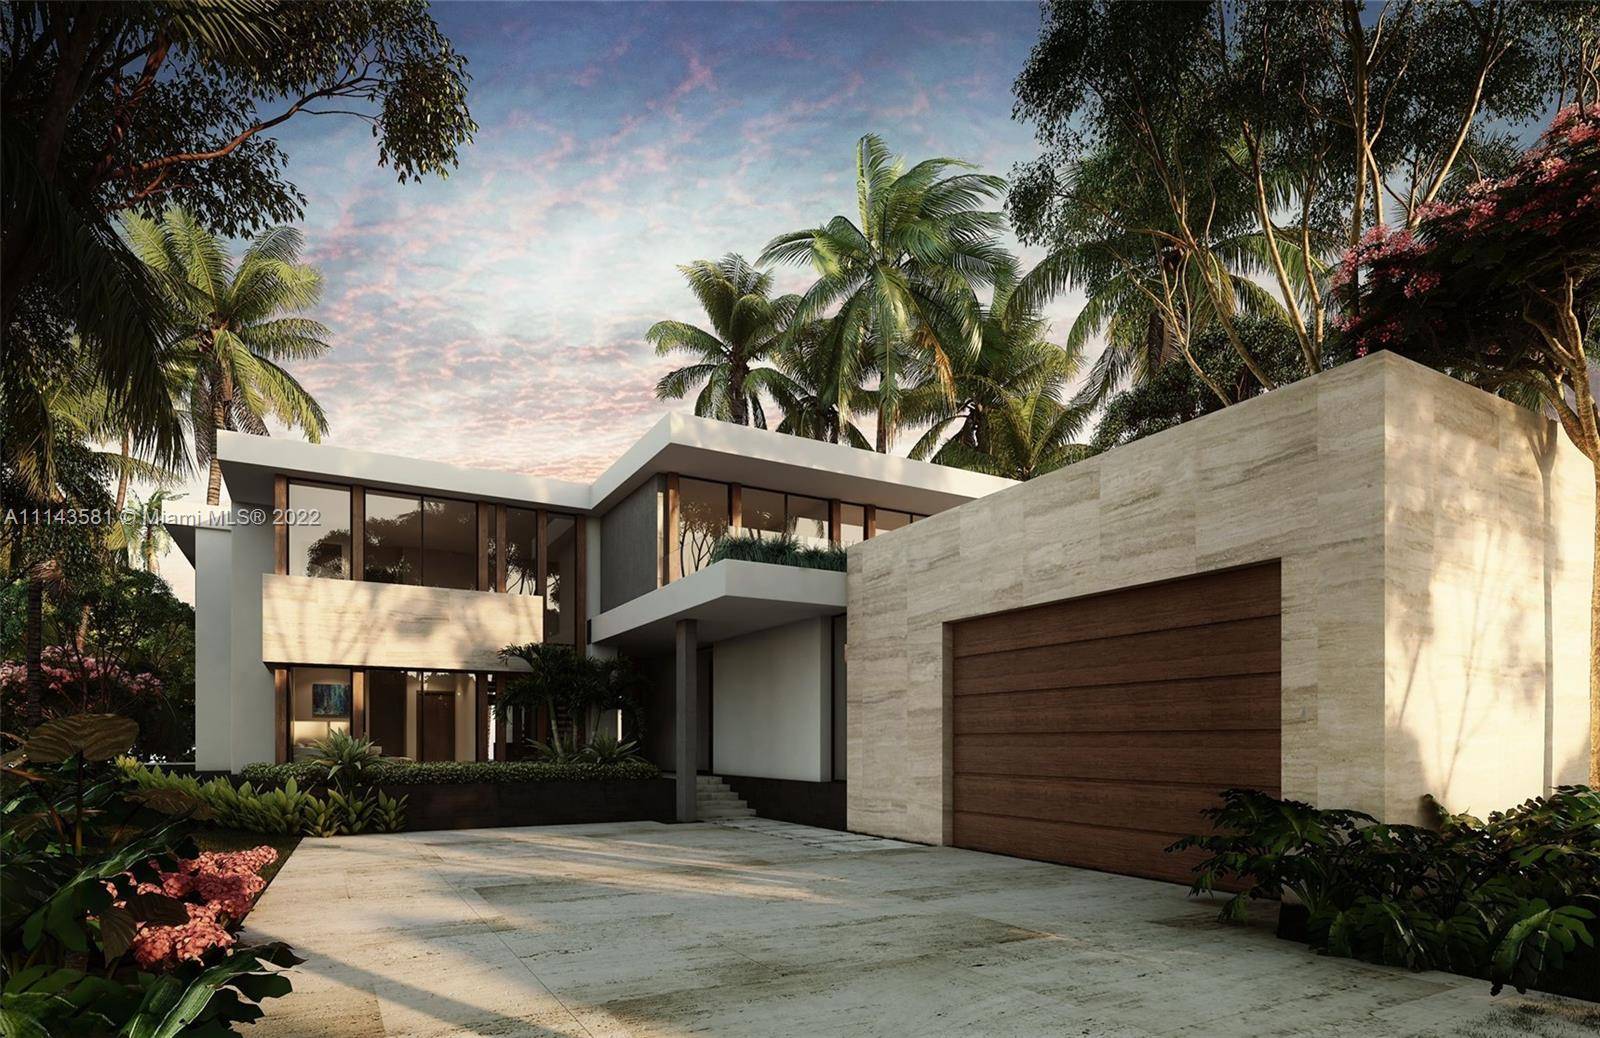 A Max Strang Masterpiece with the most coveted Sunset and Skyline views on the Venetian Islands.